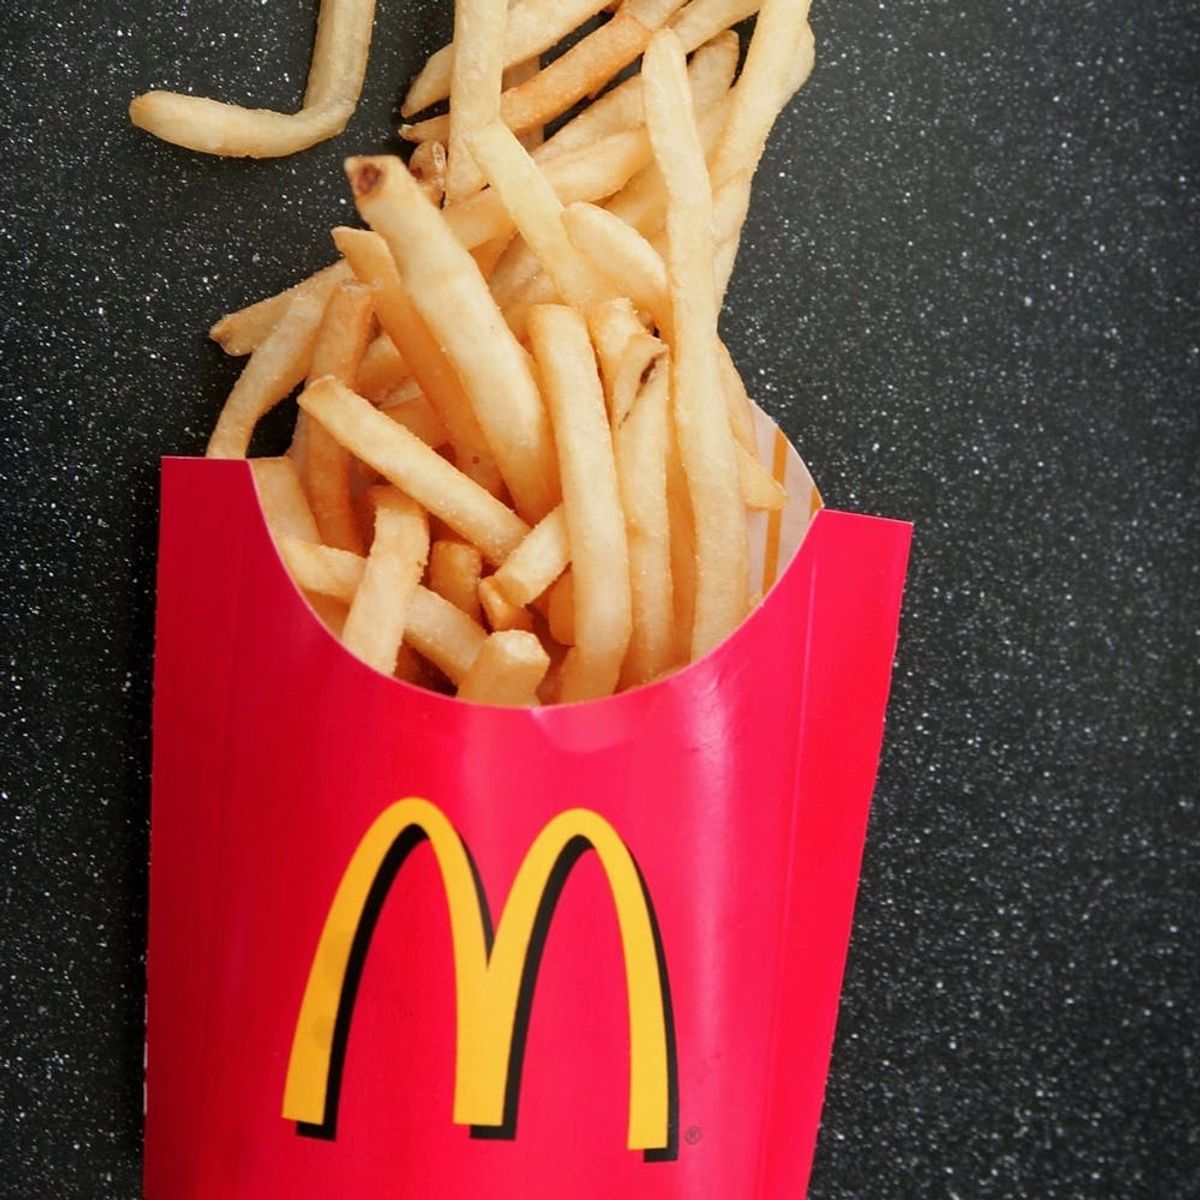 Apparently, an Ingredient Found in McDonald’s Fries Can Regrow Hair